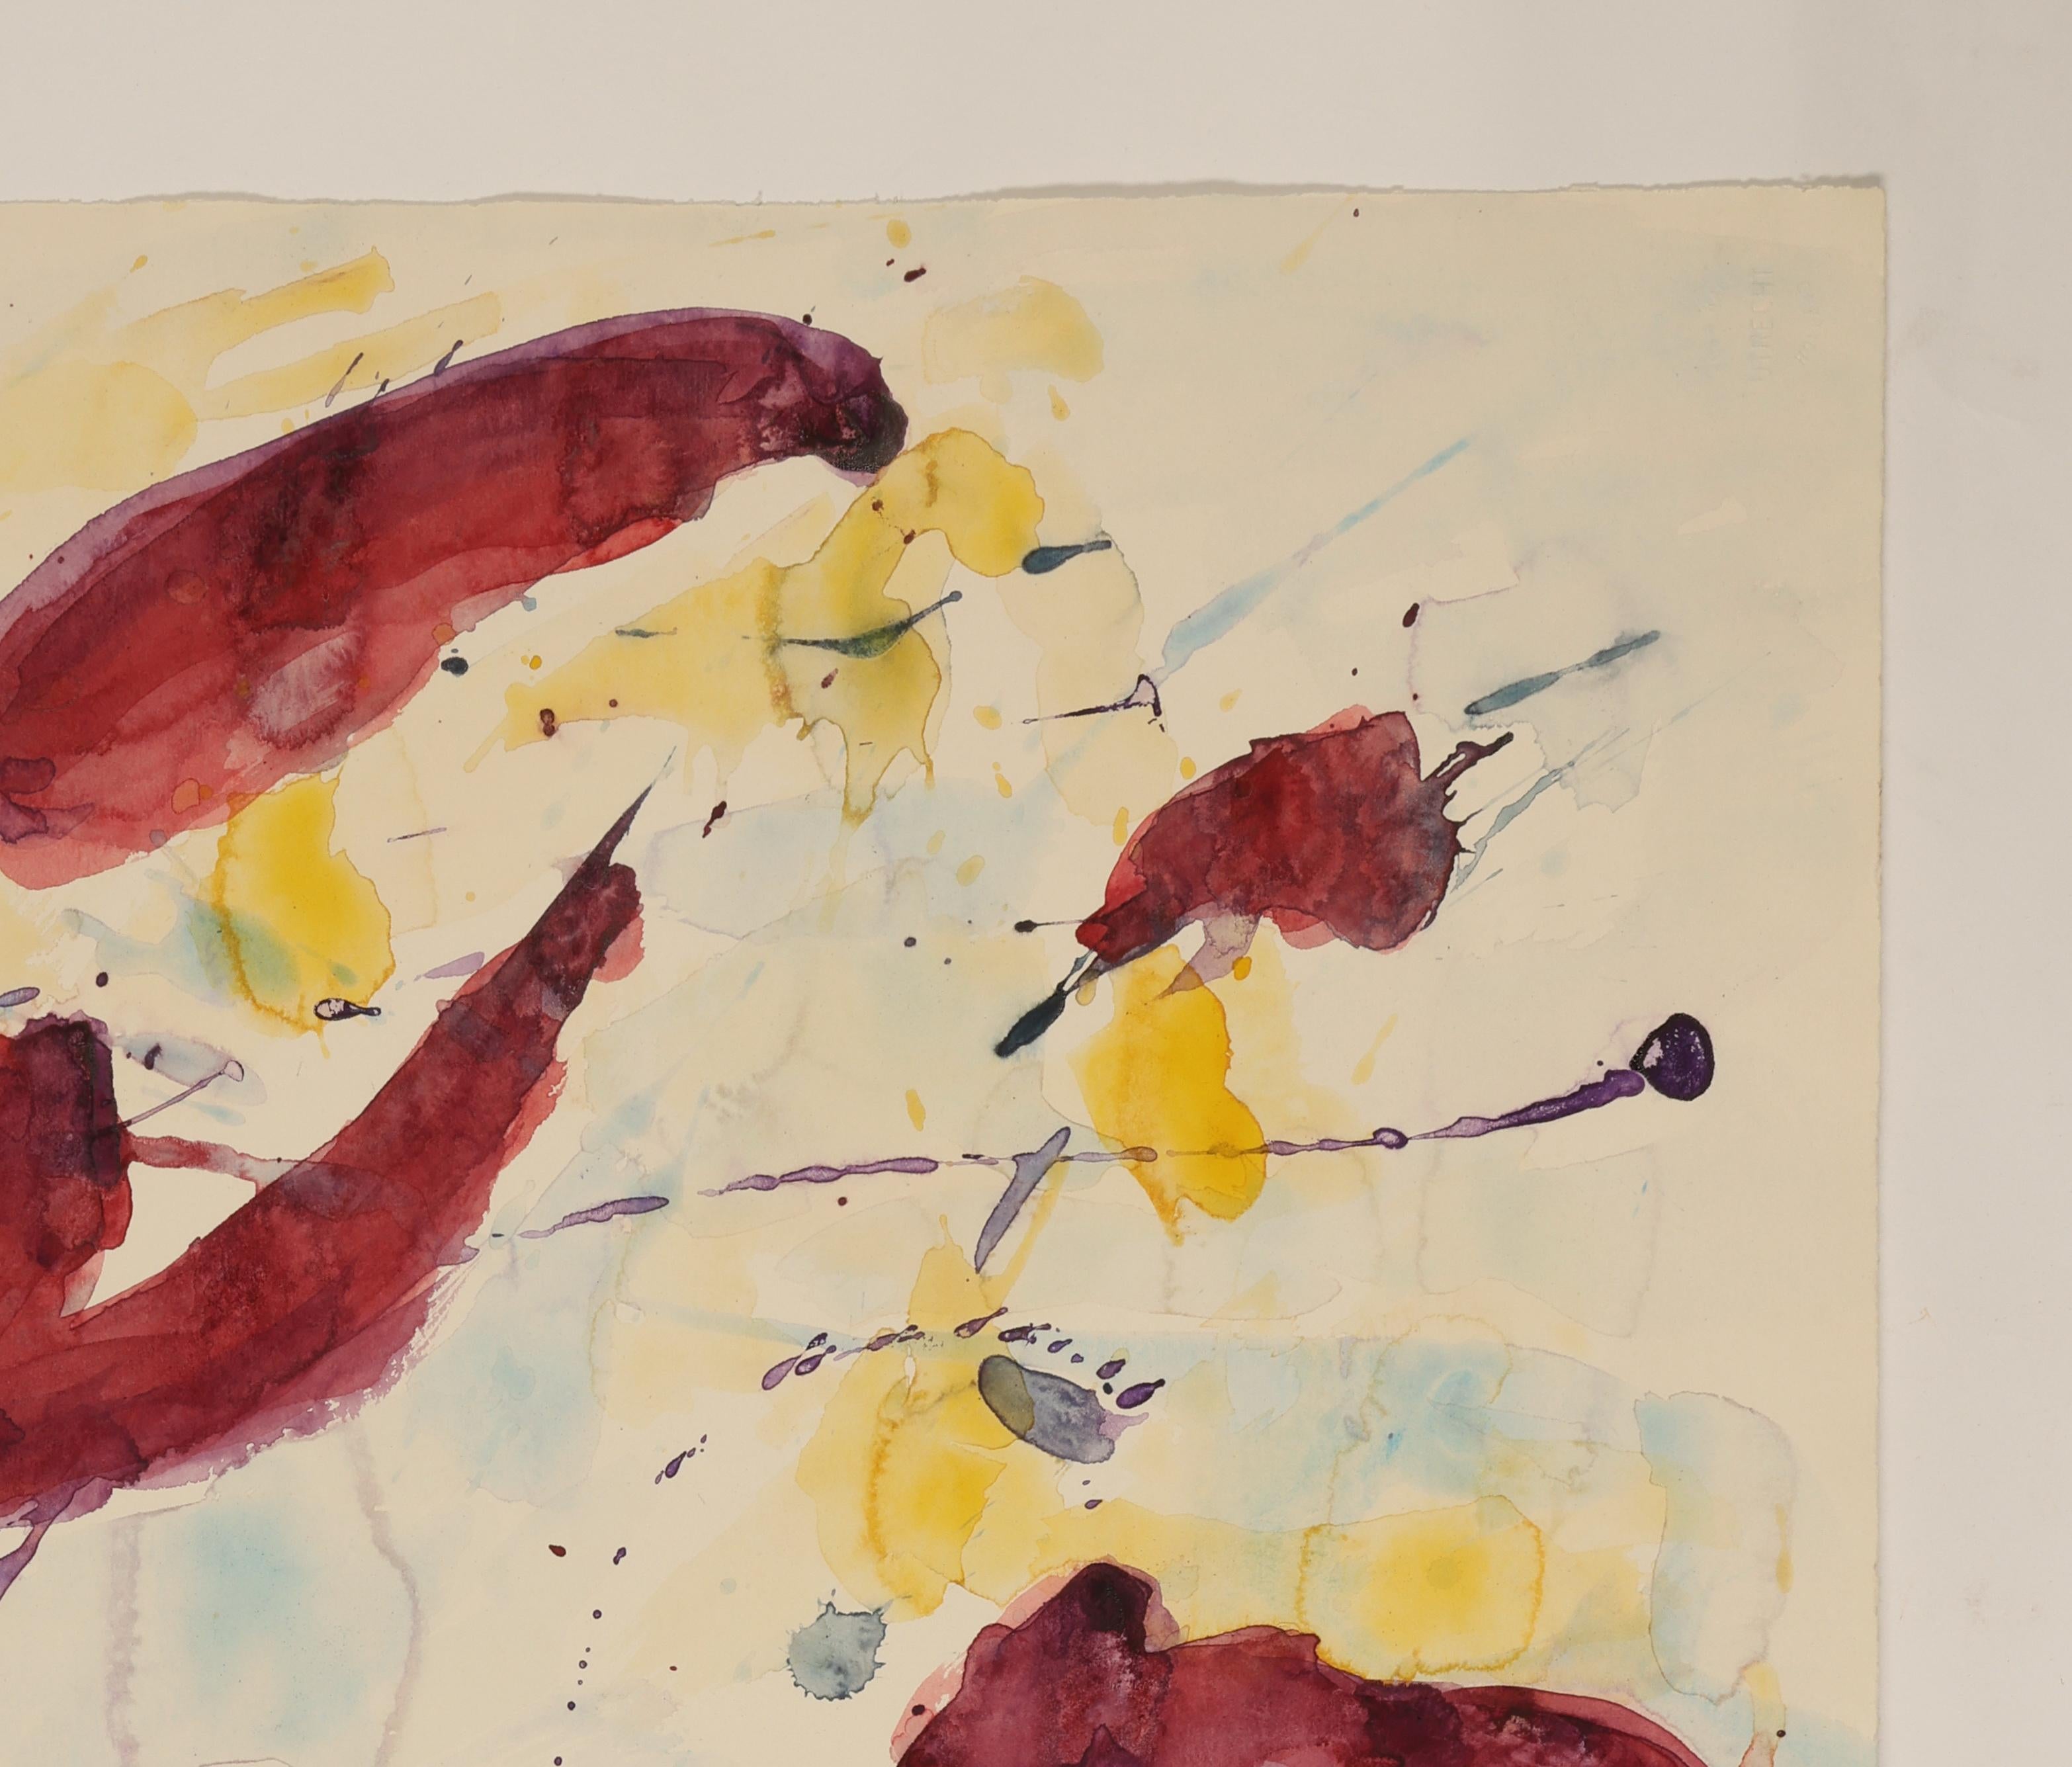 Abstract Watercolor Painting, 'Design for Sculpture', C. 2000 by David Ruth For Sale 2